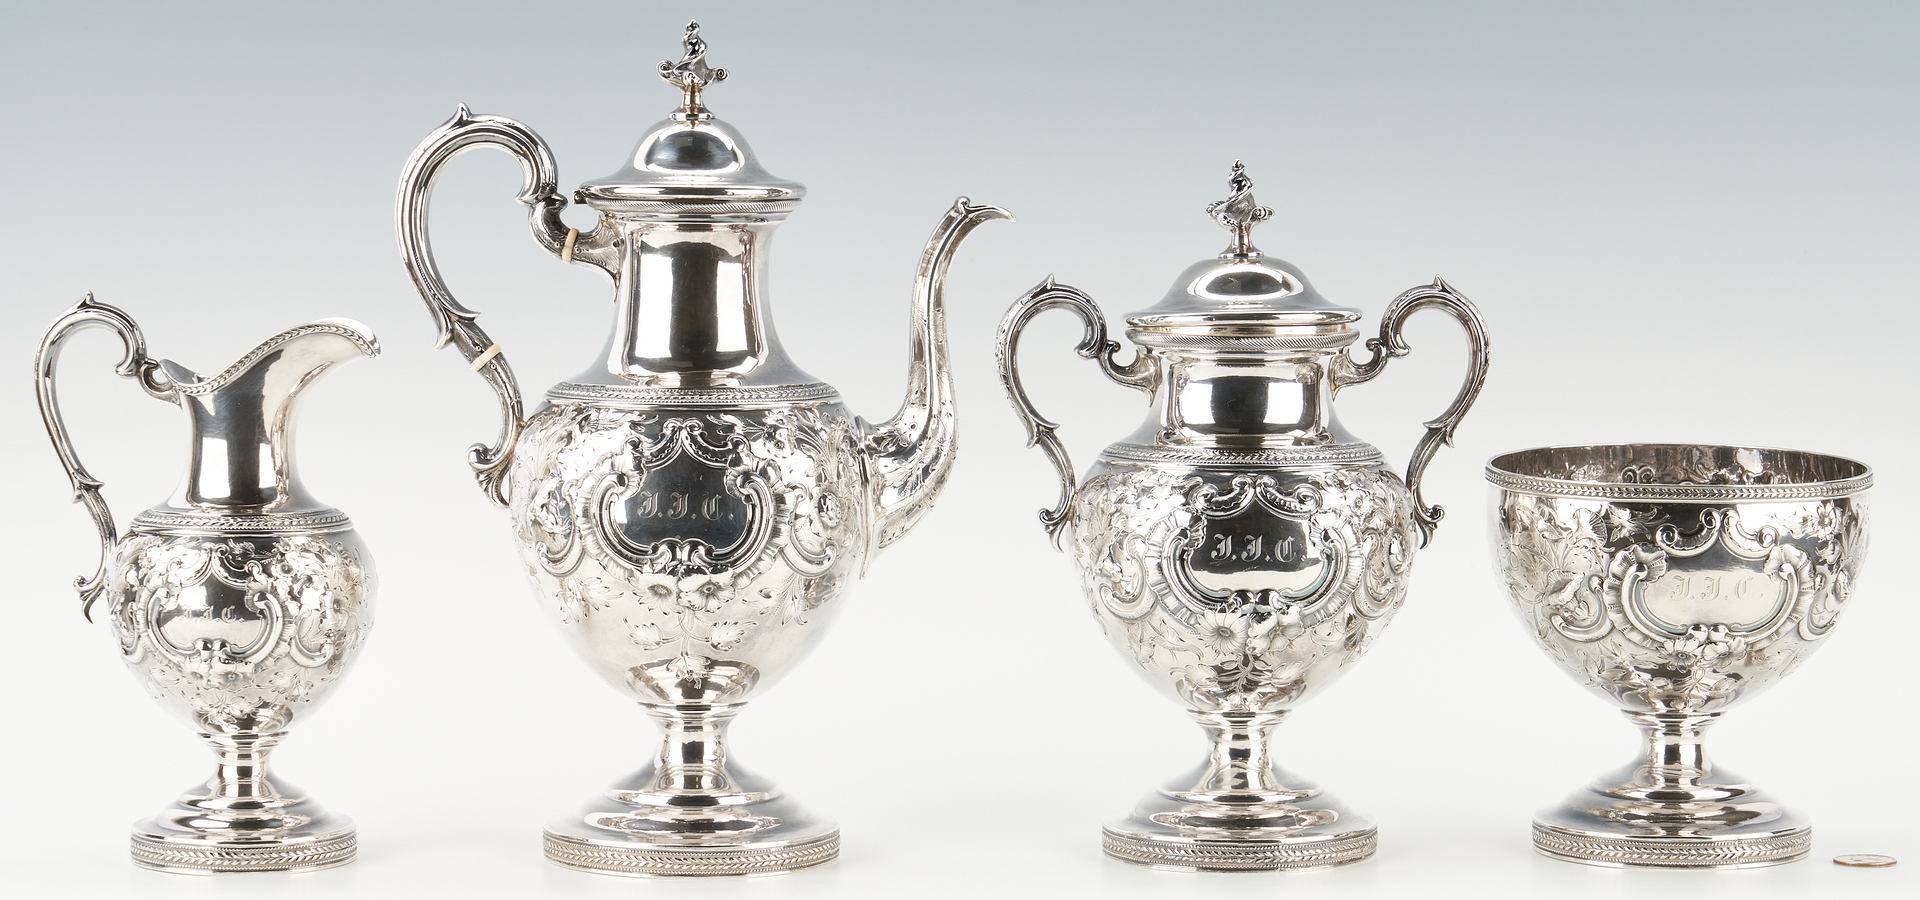 Lot 108: American Repousse Coin Silver Tea Service, NY